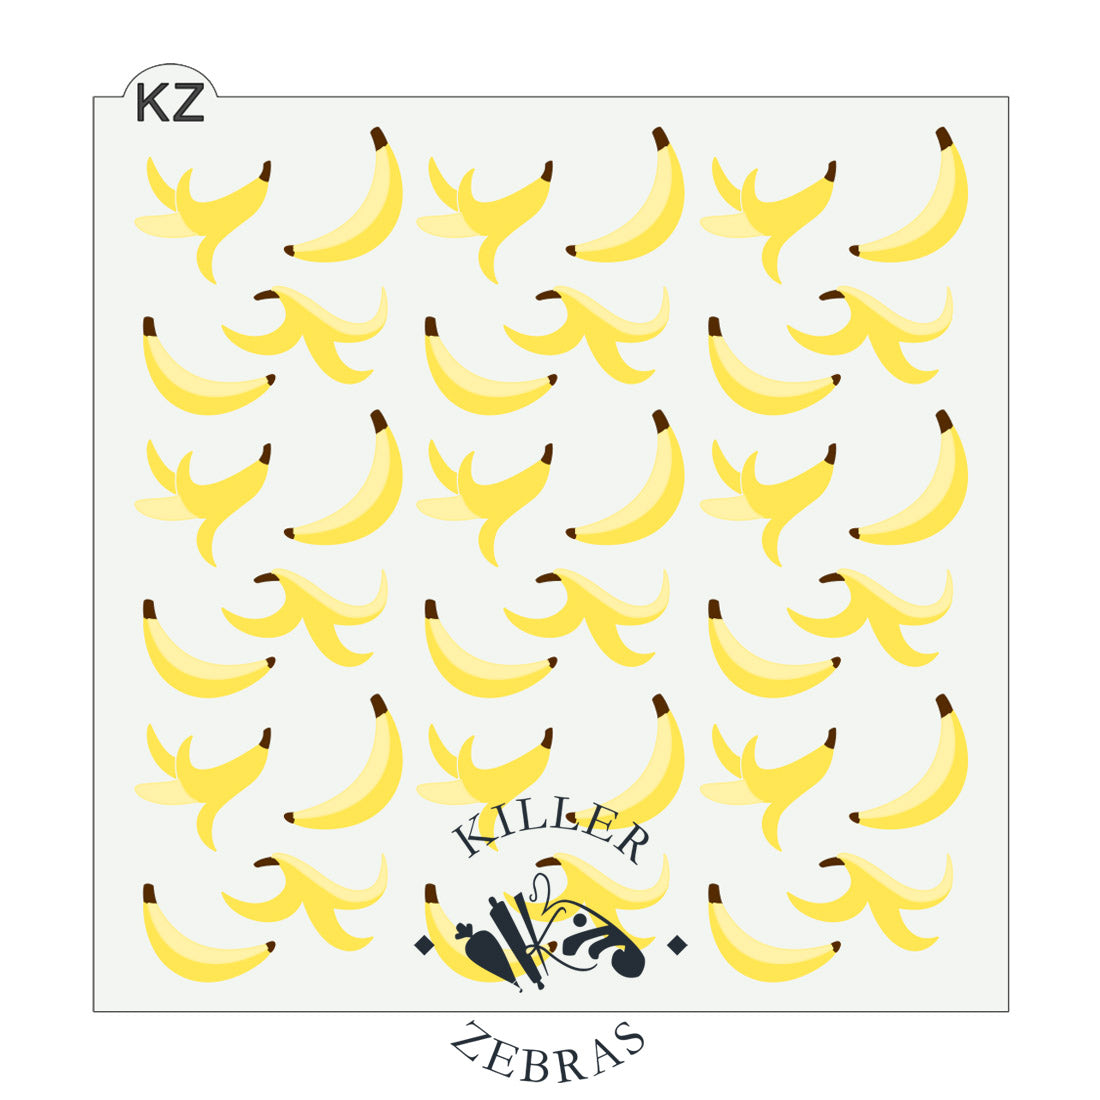 Large, square stencil with whole and peeled, yellow bananas filling the square.